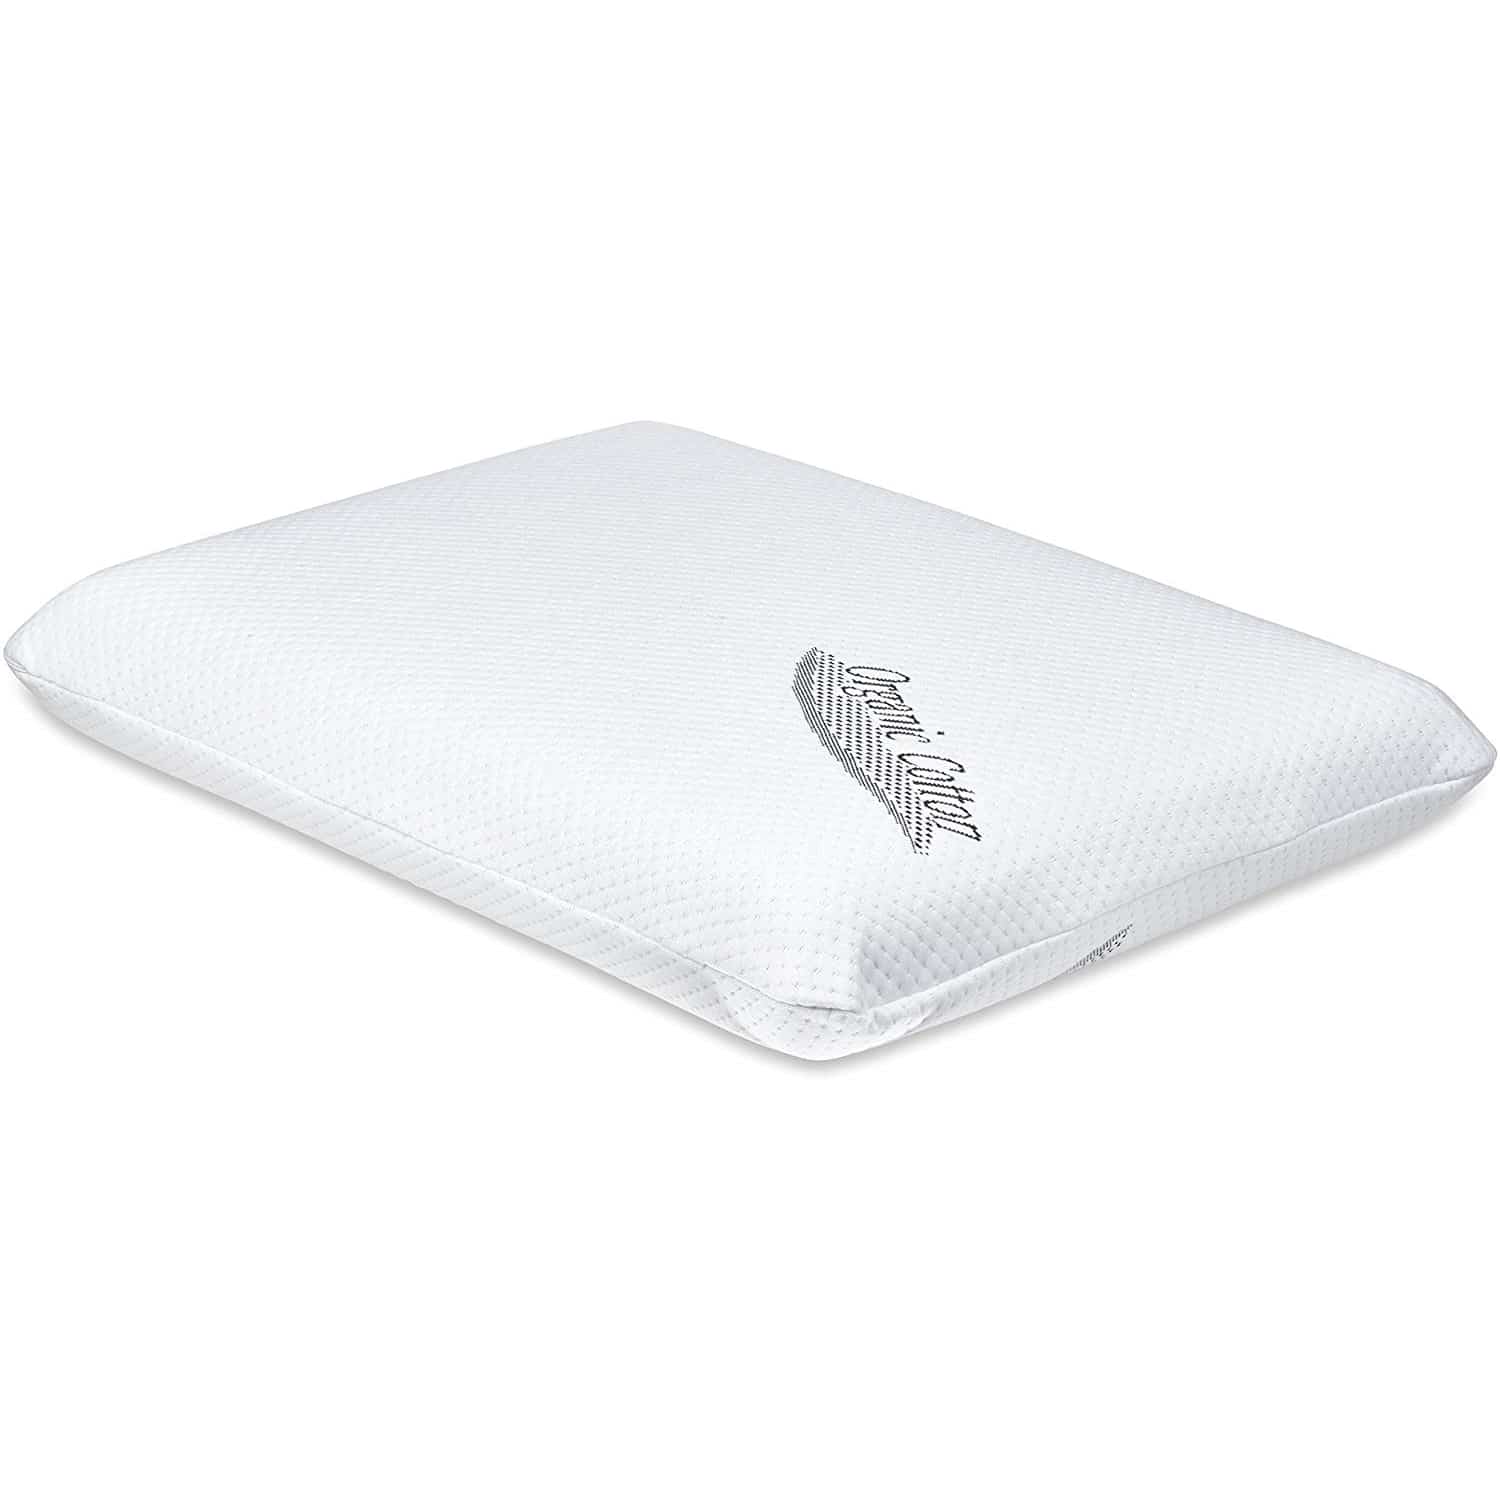 TruContour Thin Memory Foam Pillow for Stomach Sleepers